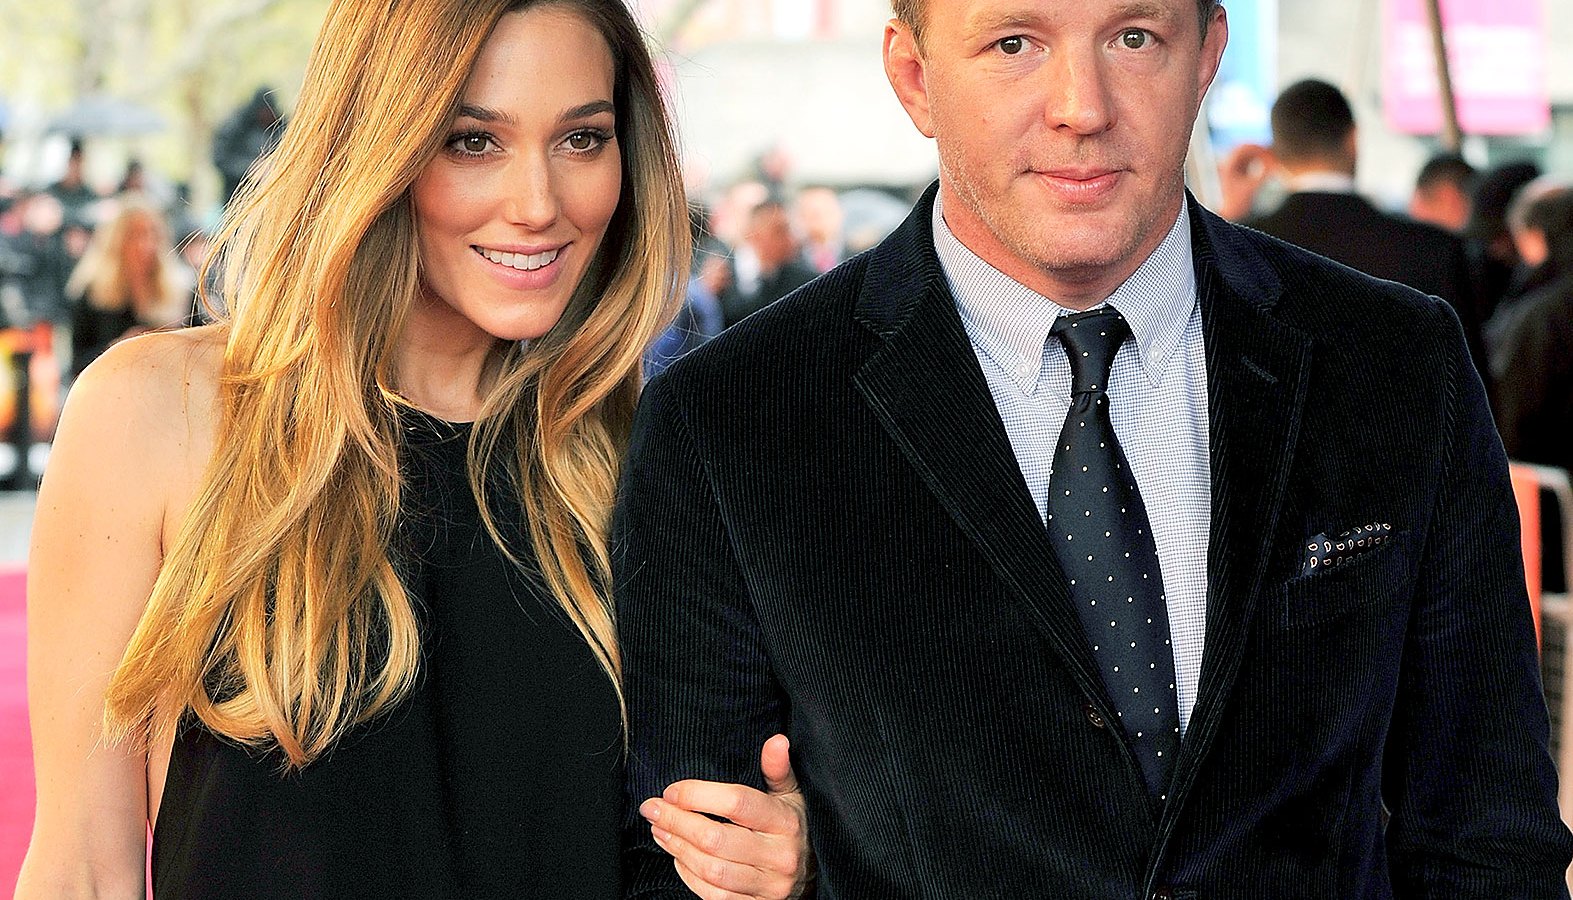 Guy Ritchie and Jacqui